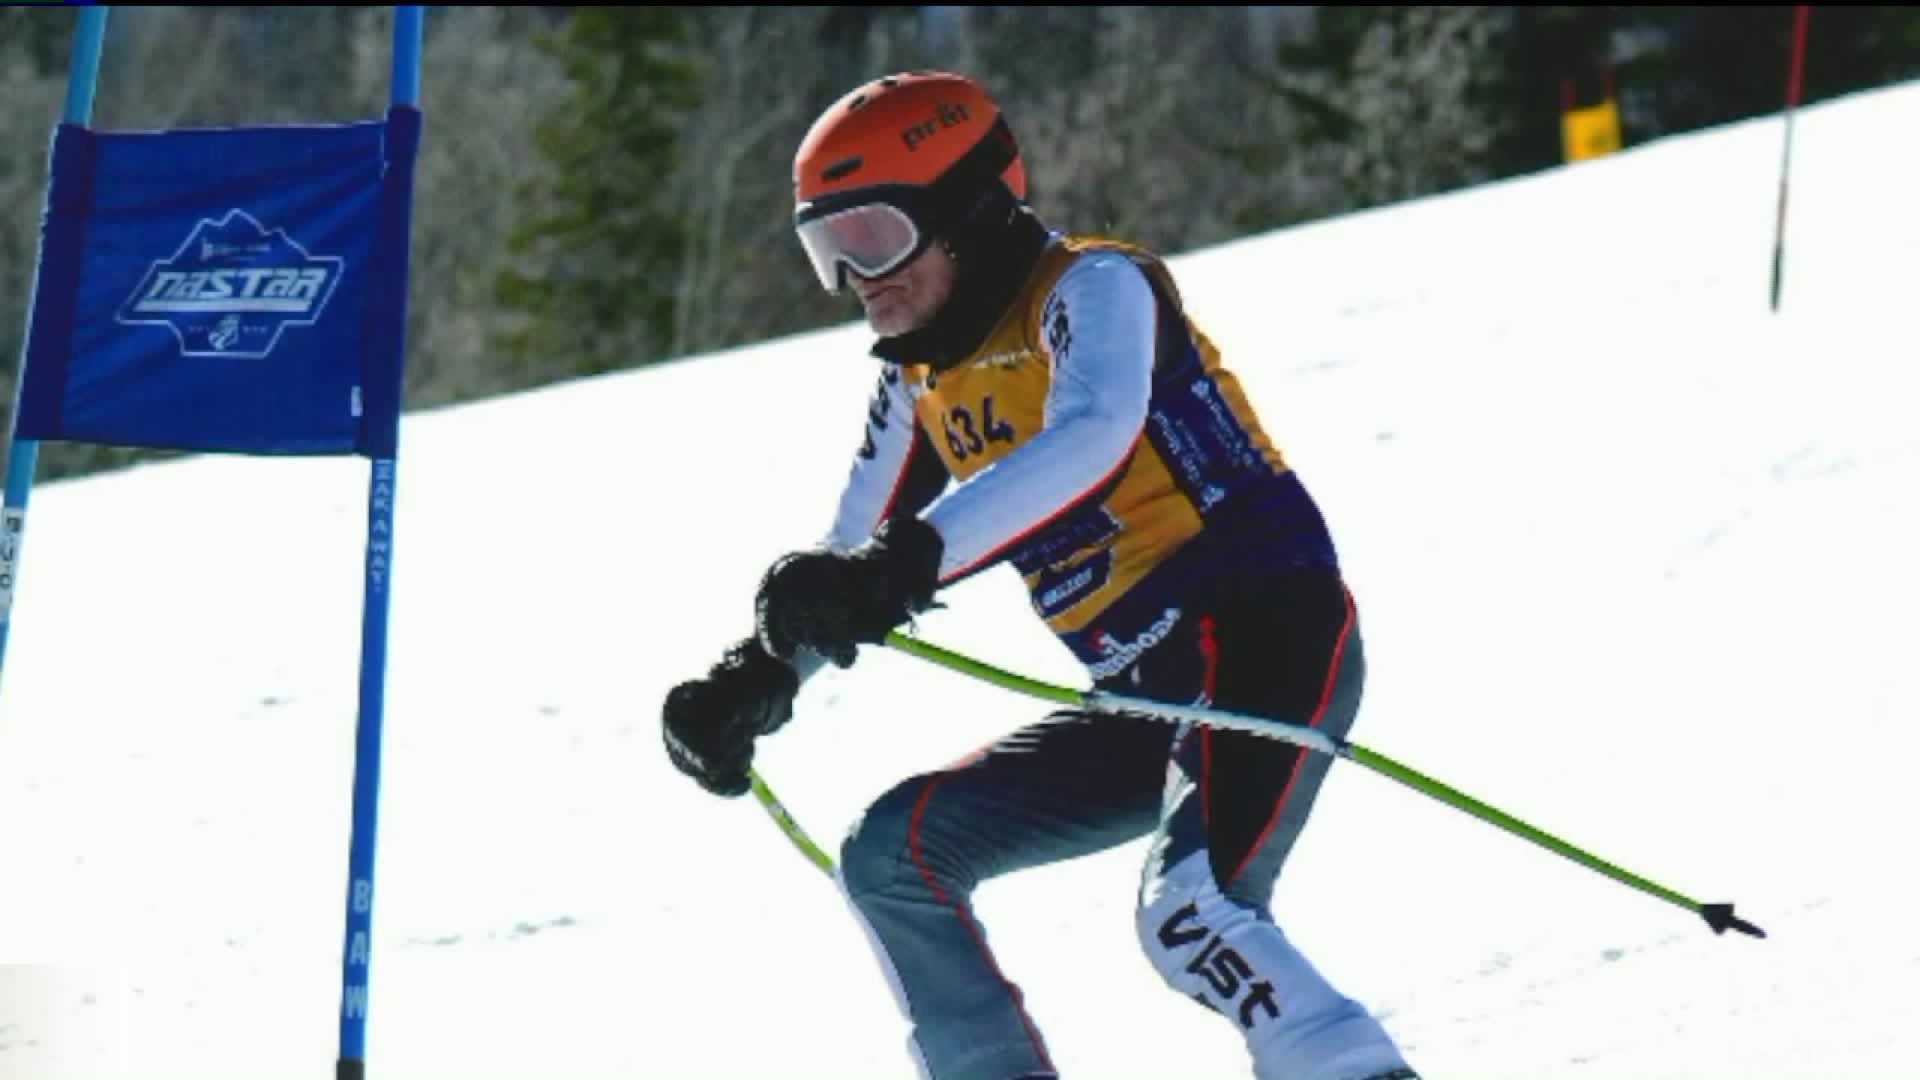 80-Year-Old National Champion Skier Comes Home with Bronze Medals